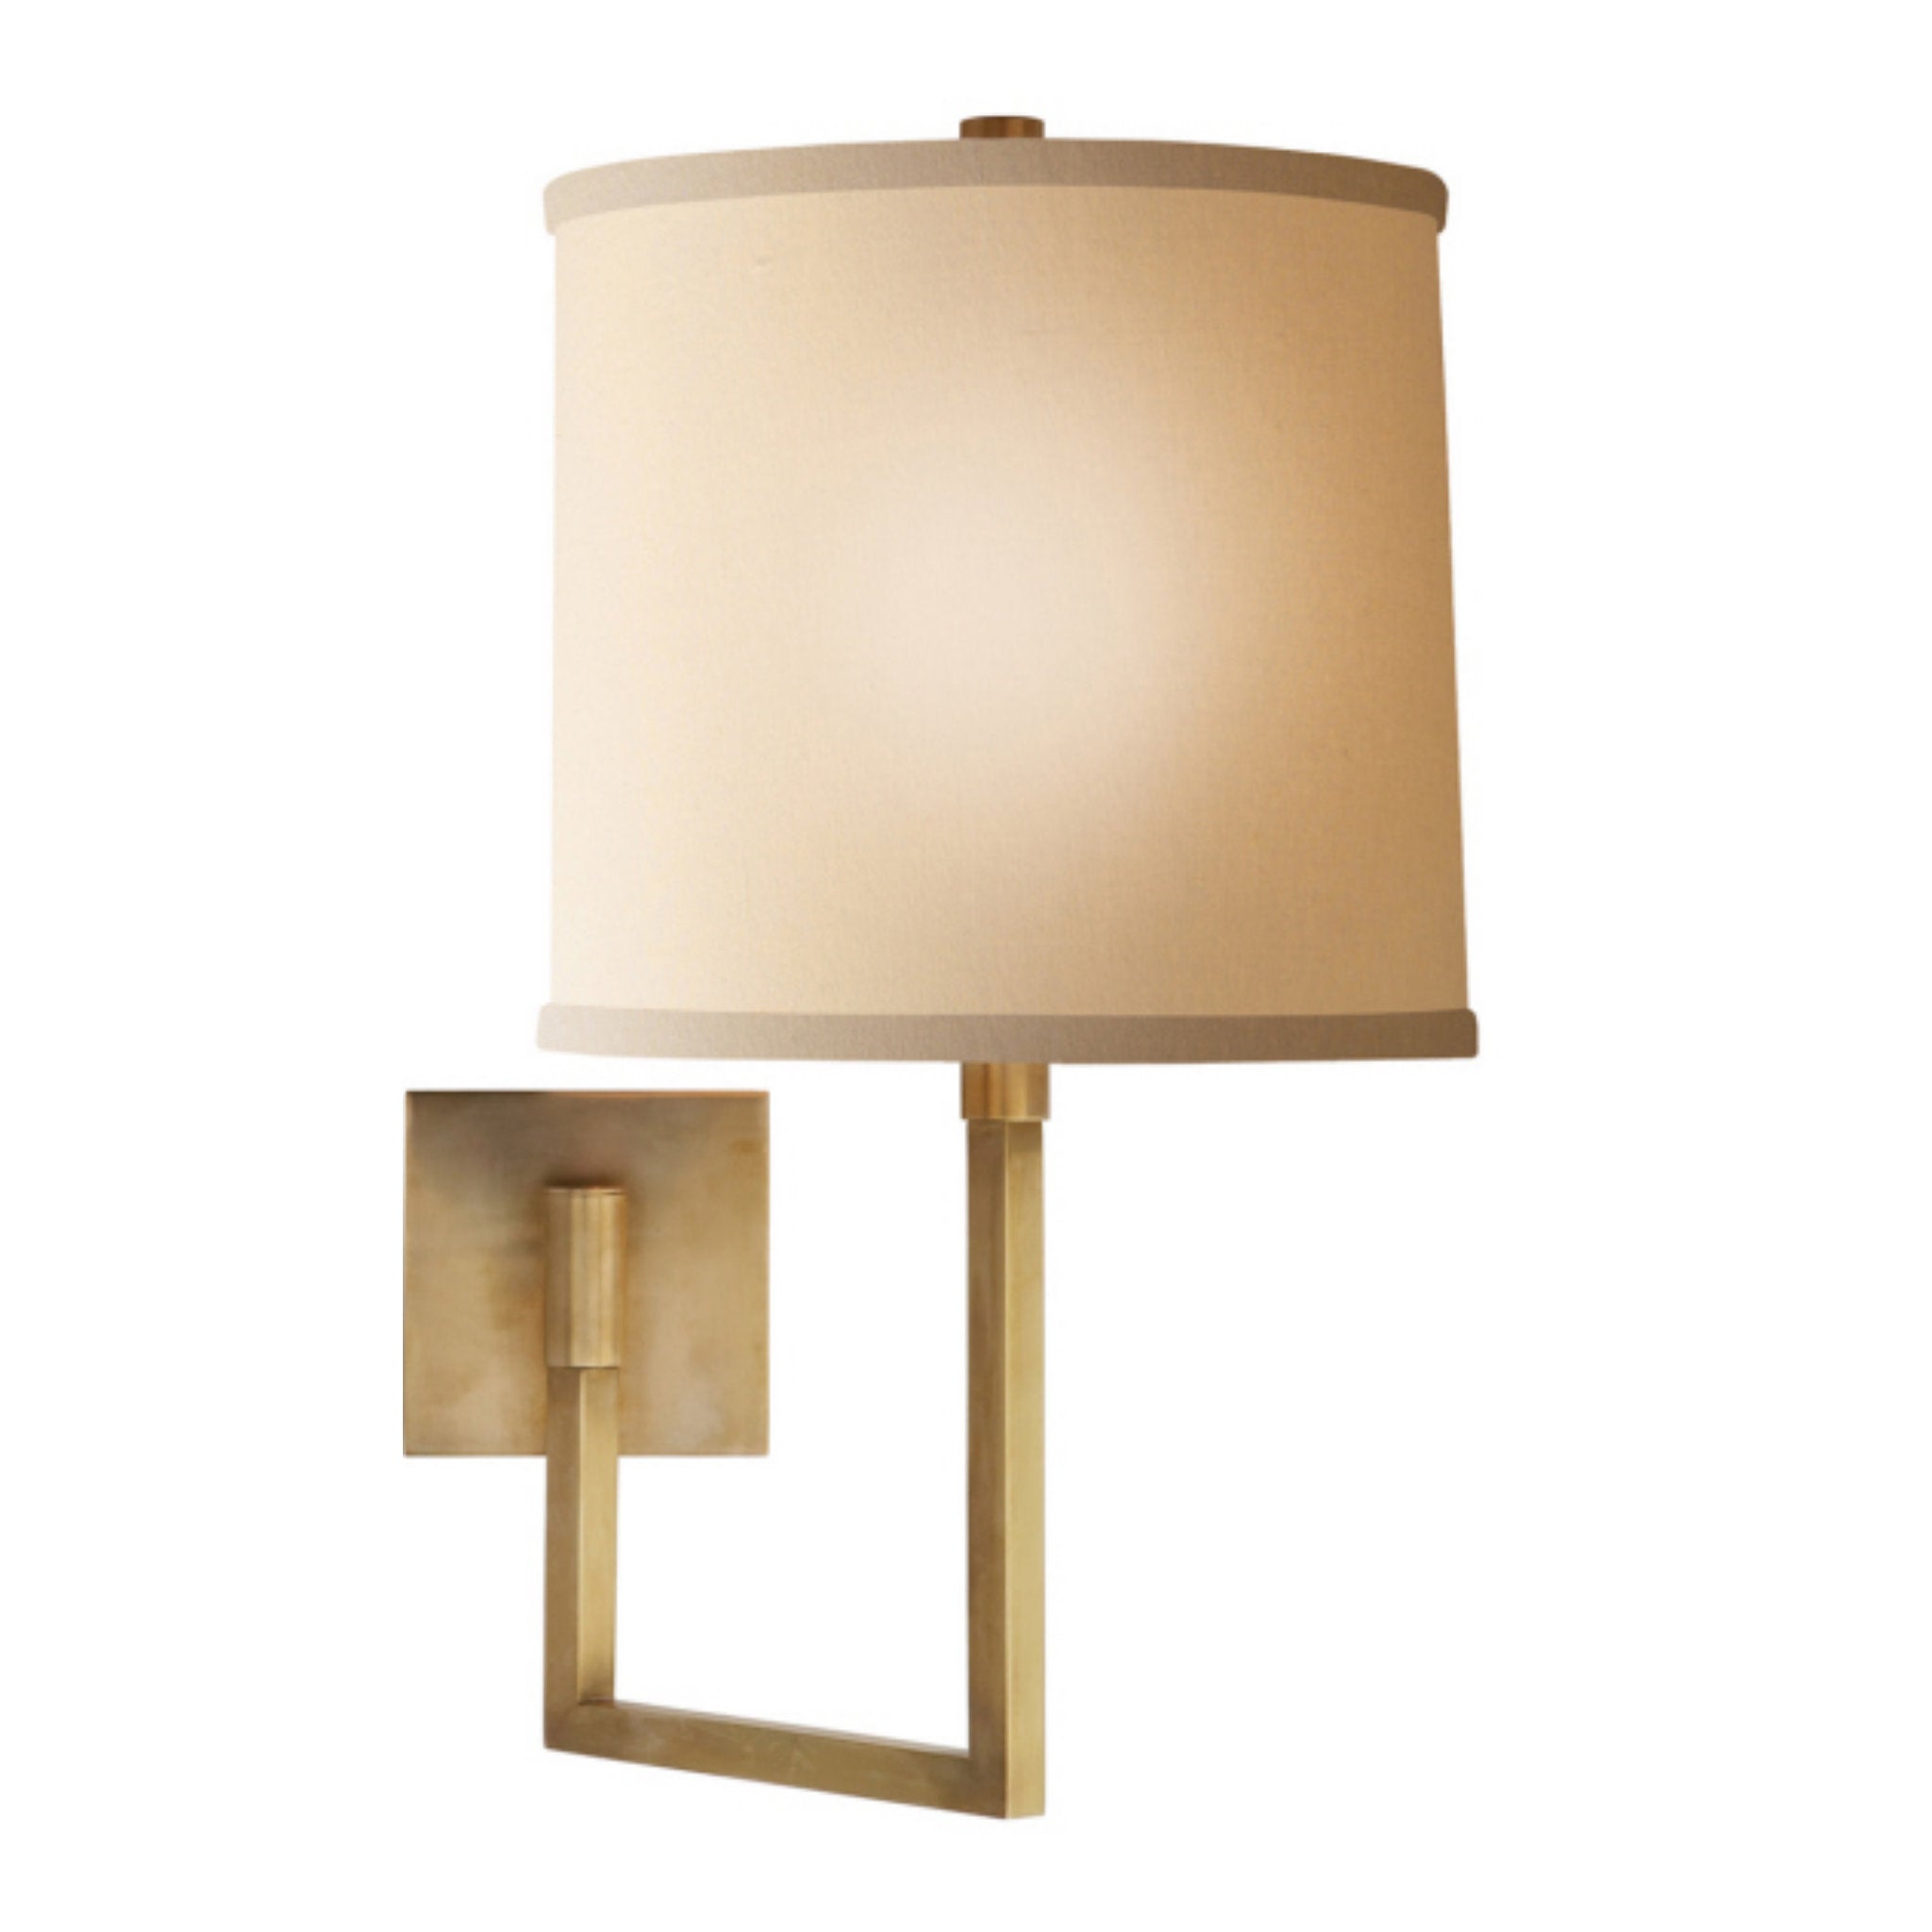 Barbara Barry Aspect Large Articulating Sconce in Soft Brass with Ivory Linen Shade